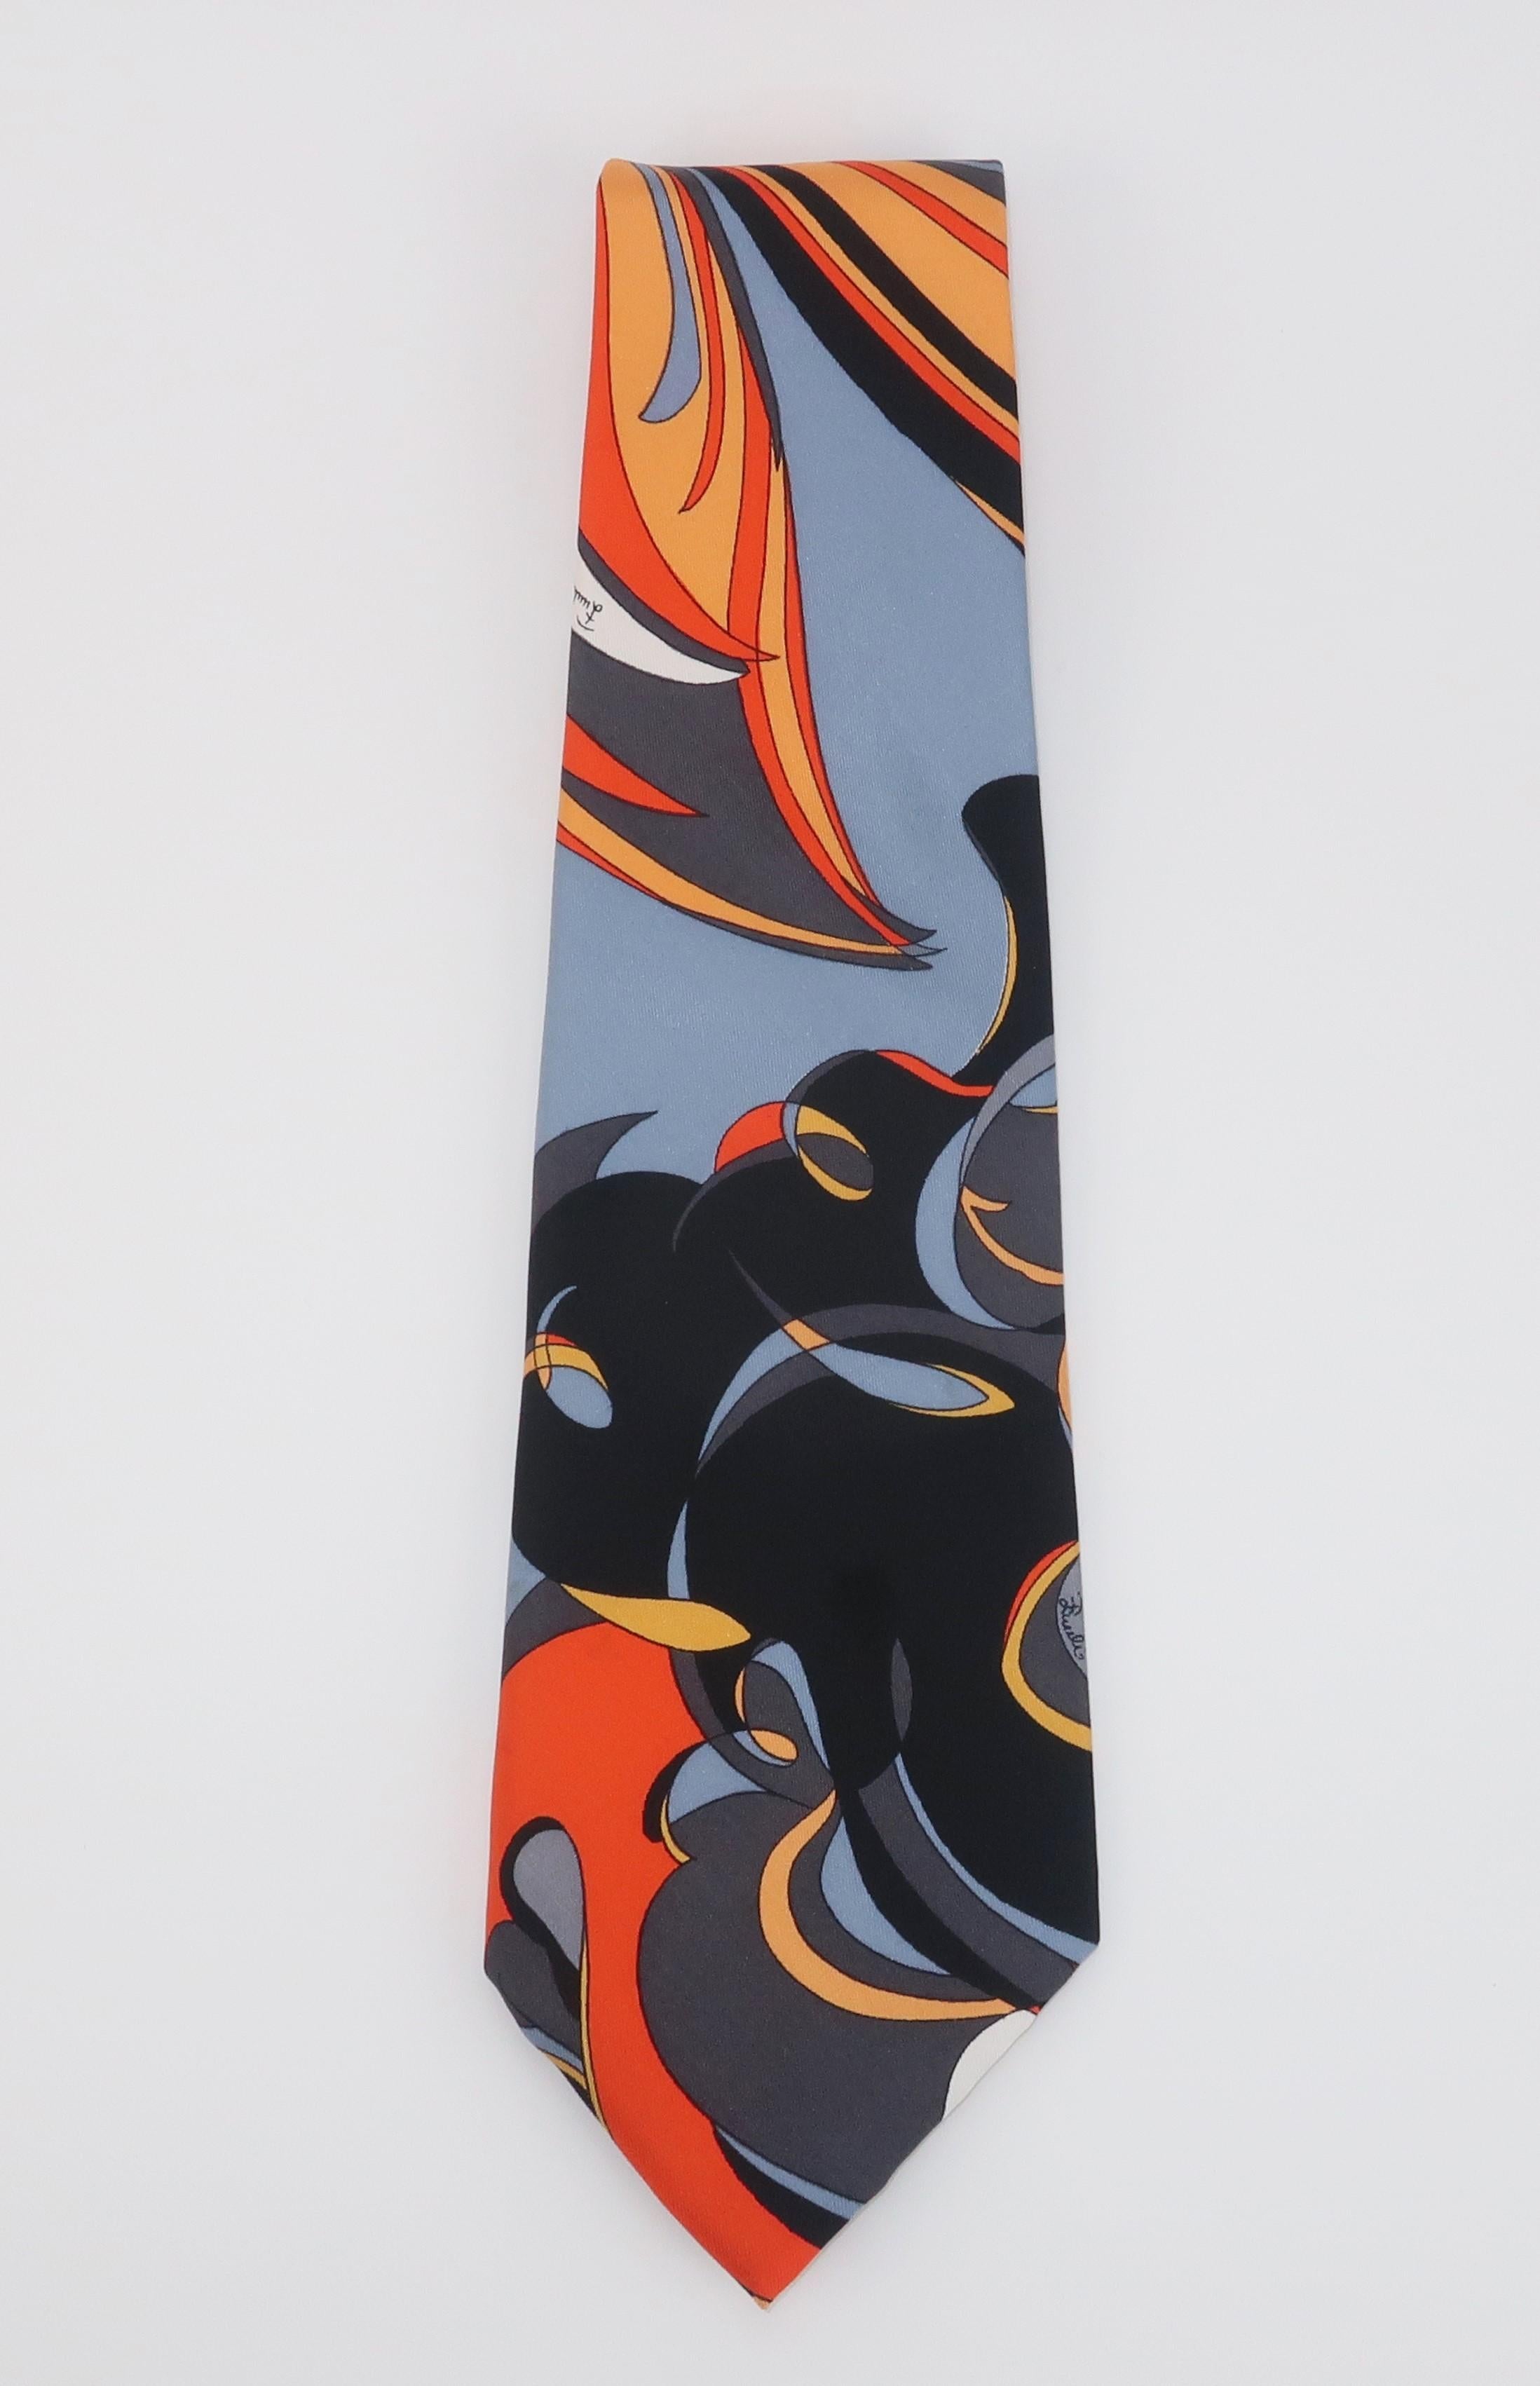 1970's Emilio Pucci silk neck tie in shades of orange, gray and black.  The Emilio Pucci name appears in the psychedelic design and the silk liner is embossed with the logo, as well.  It has a great mod look that is perfect for adding a Pucci style